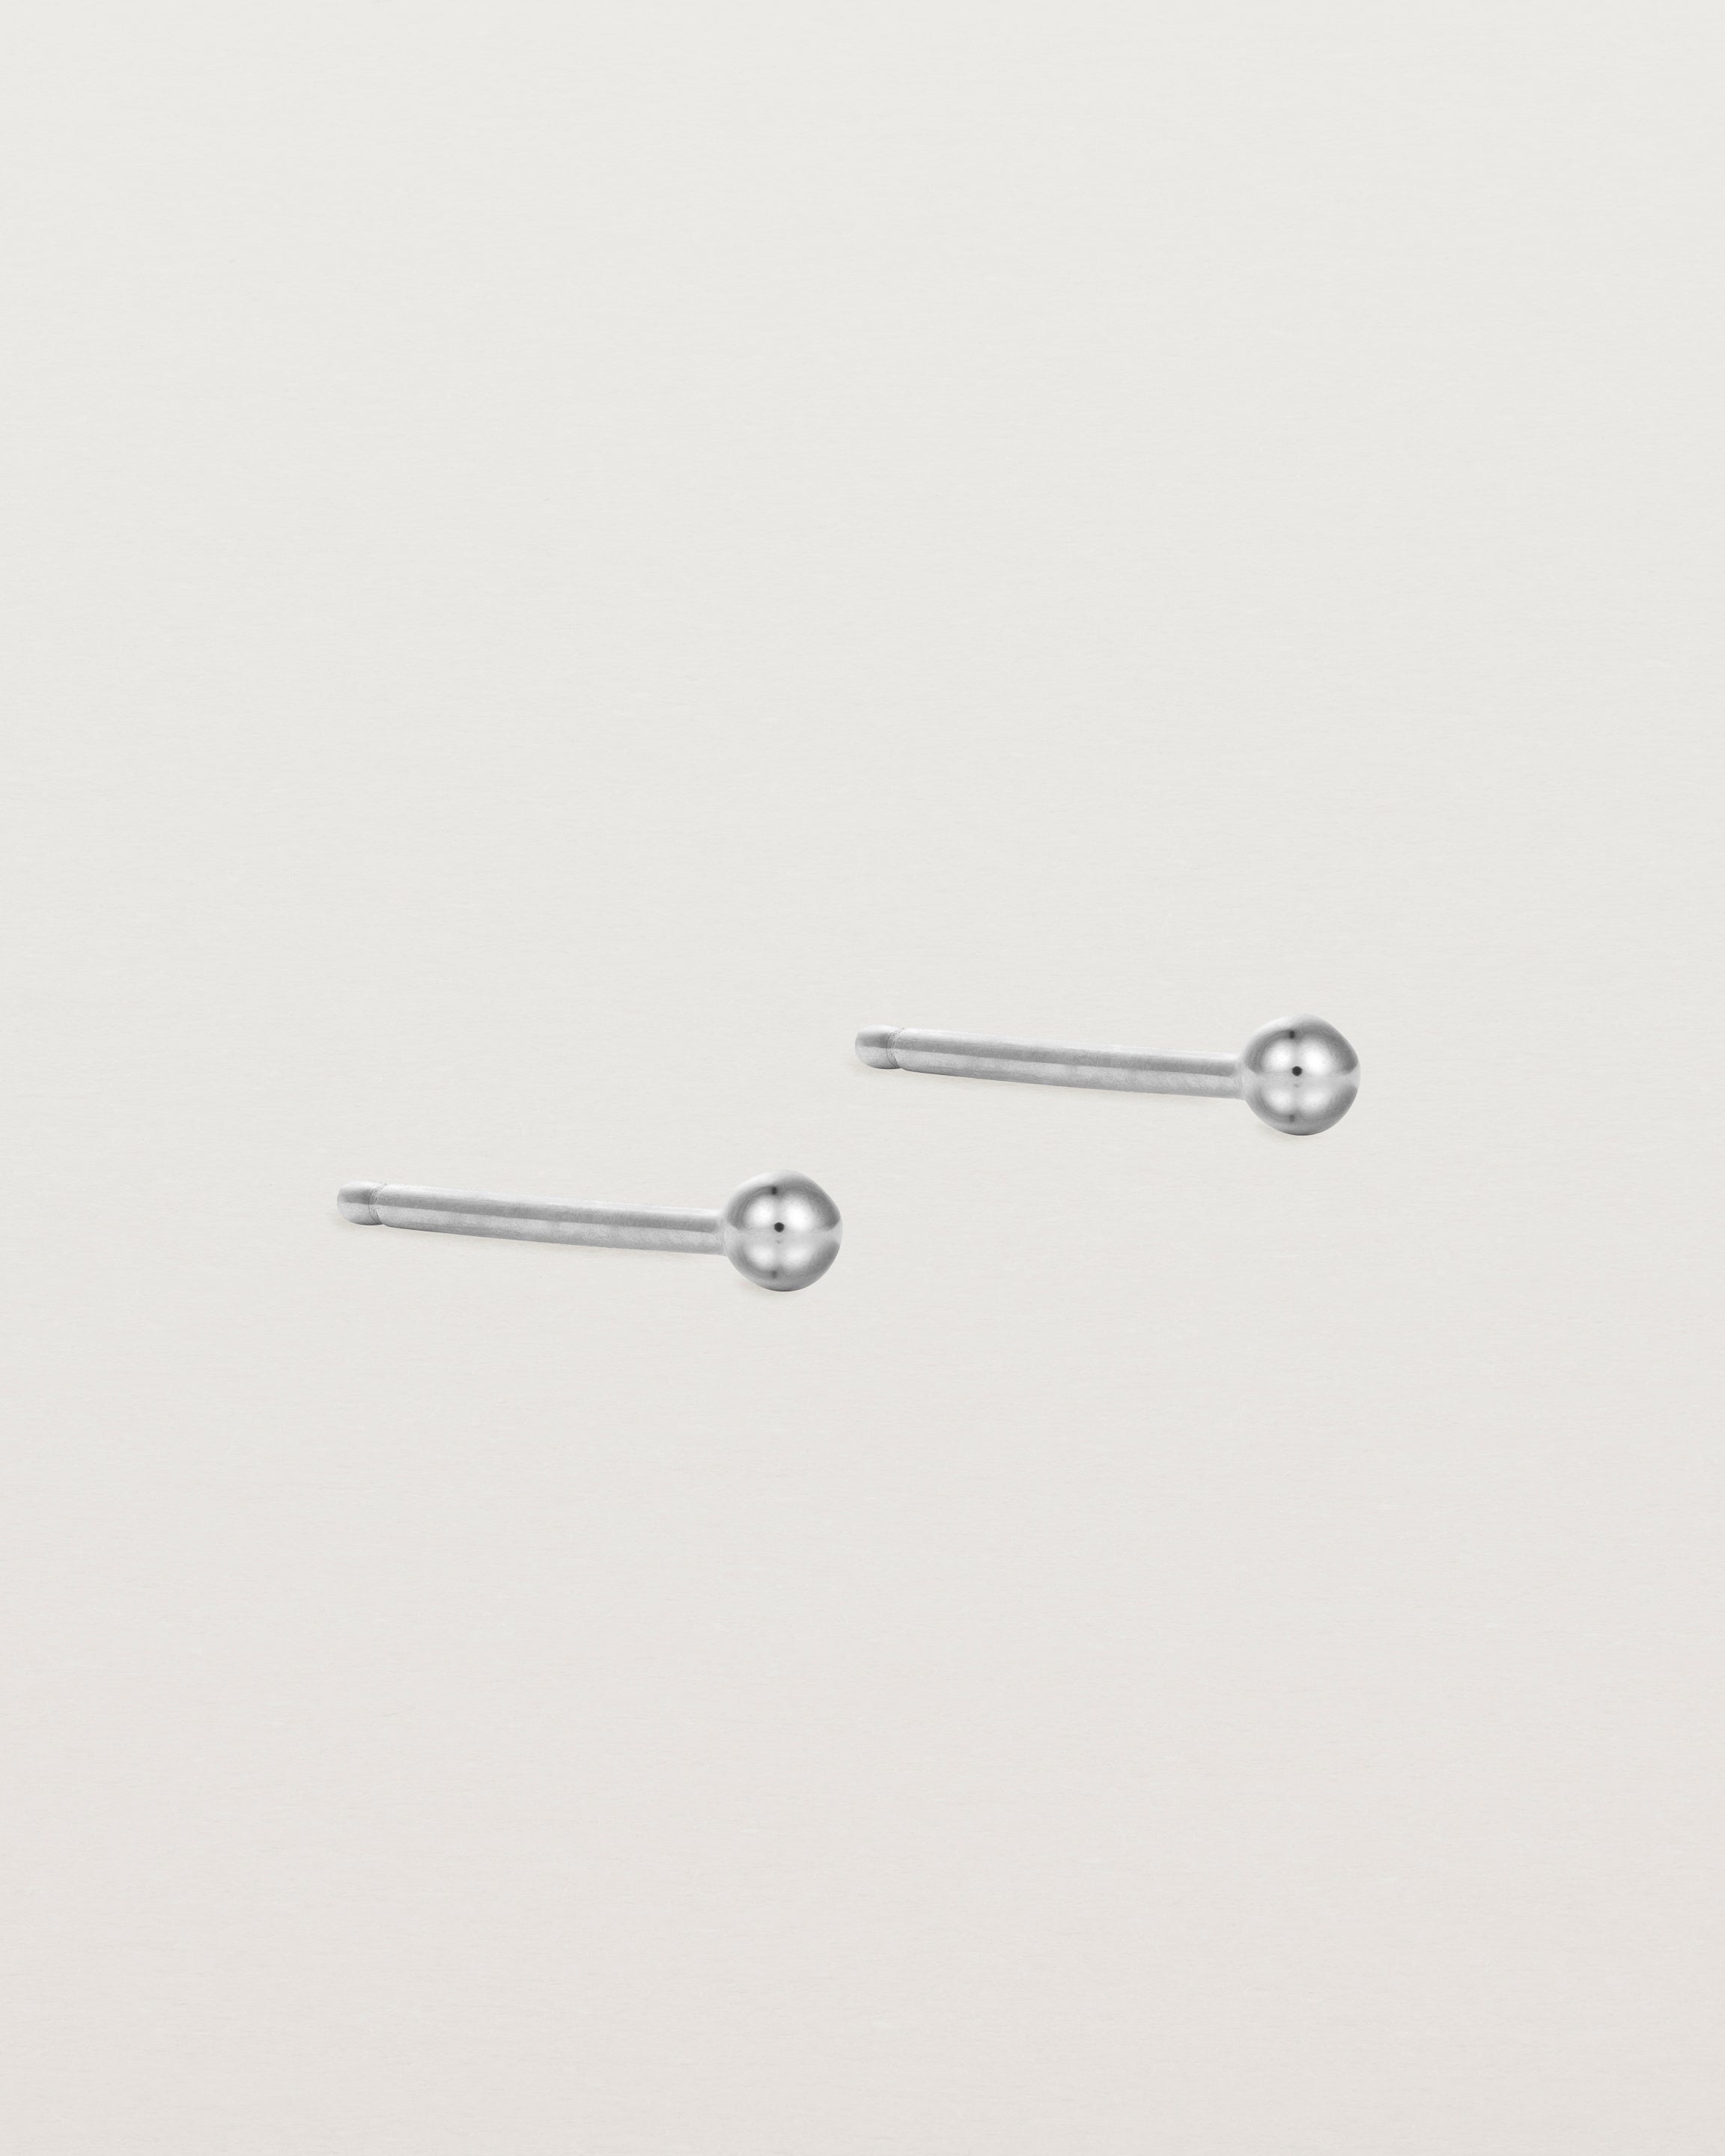 A pair of tiny sterling silver studs featuring a round ball